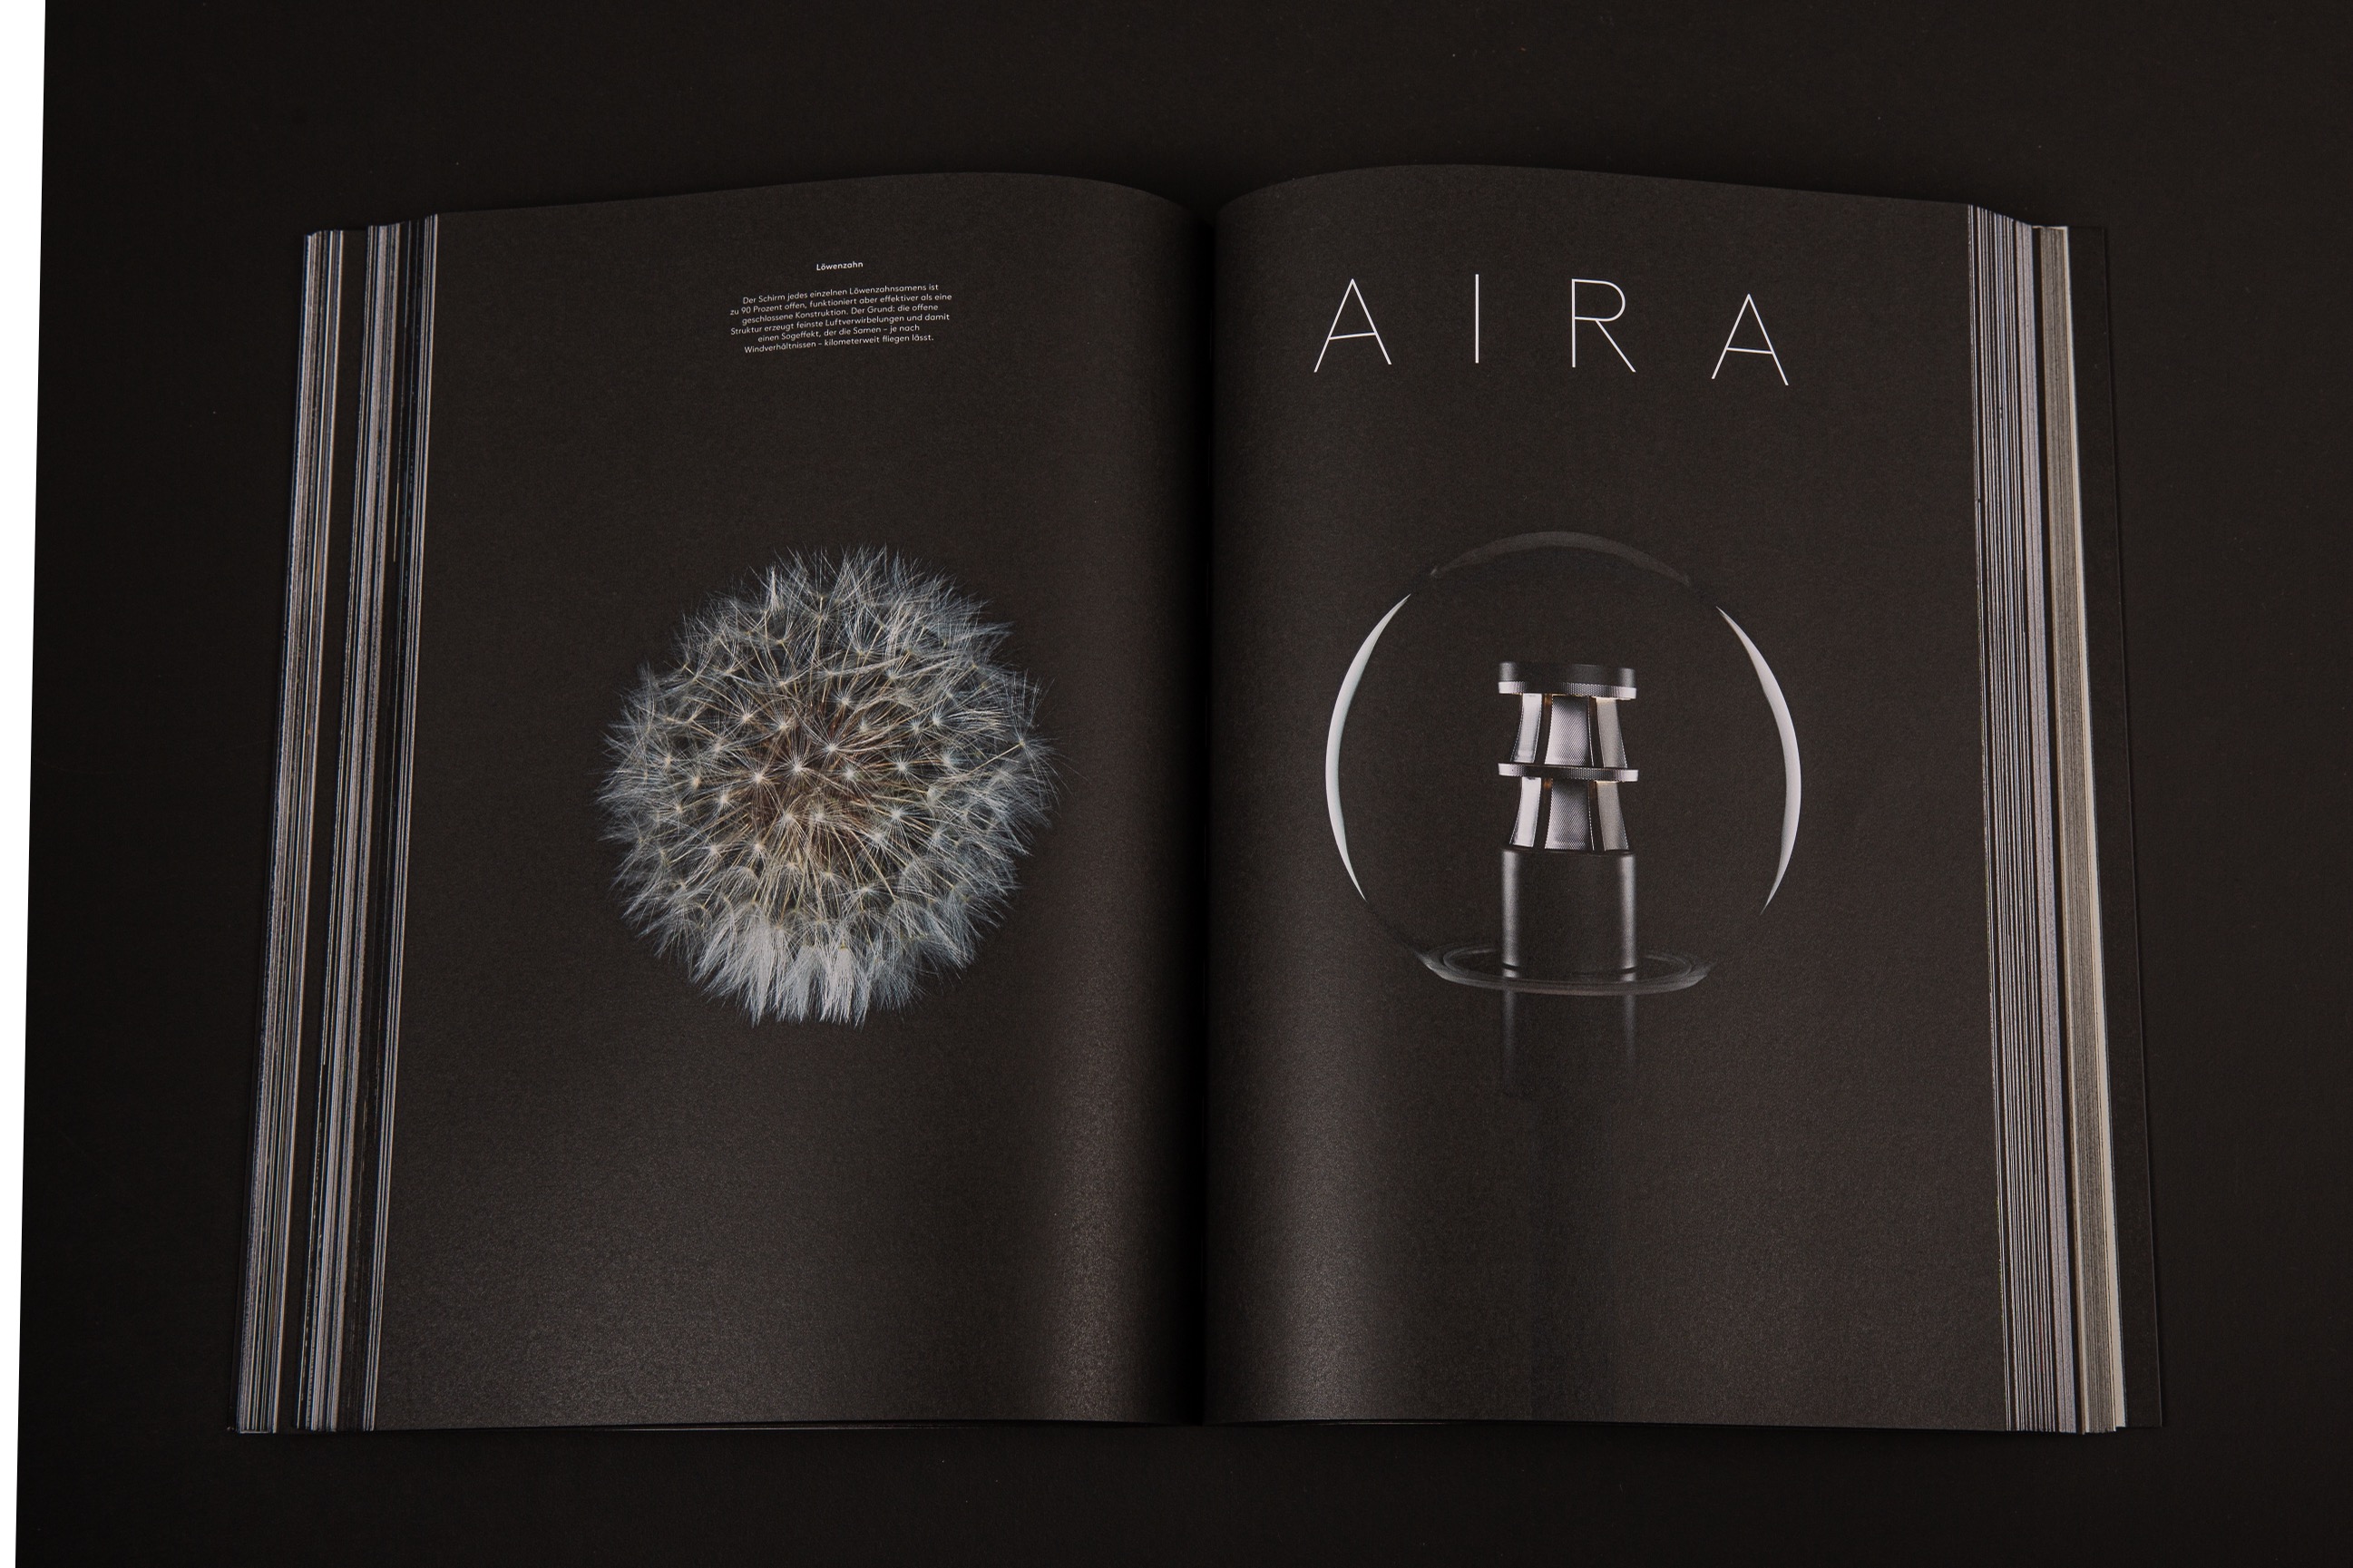 An image of Selux Imagebook, showcasing a double page spread of the opening chapter for Aira Luminaire.